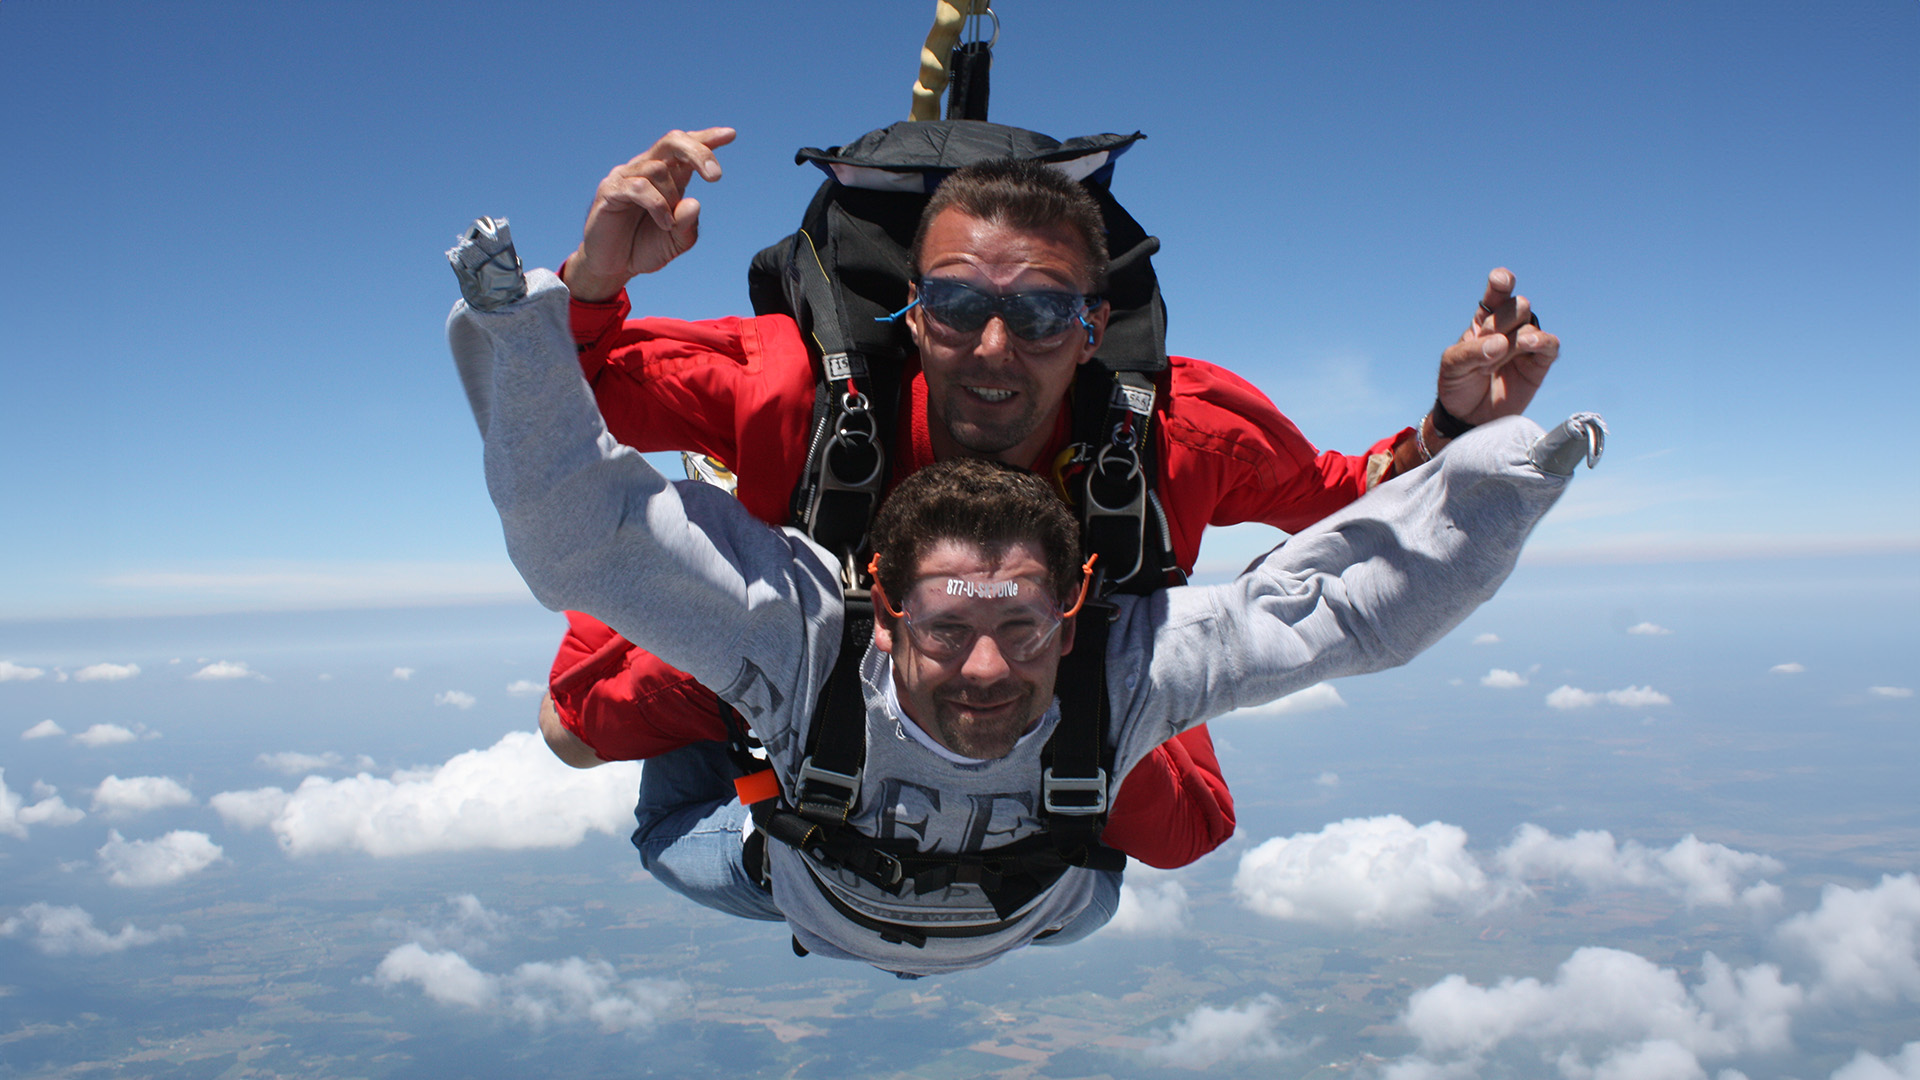 Jason Koger Skydiving with his prostheses.